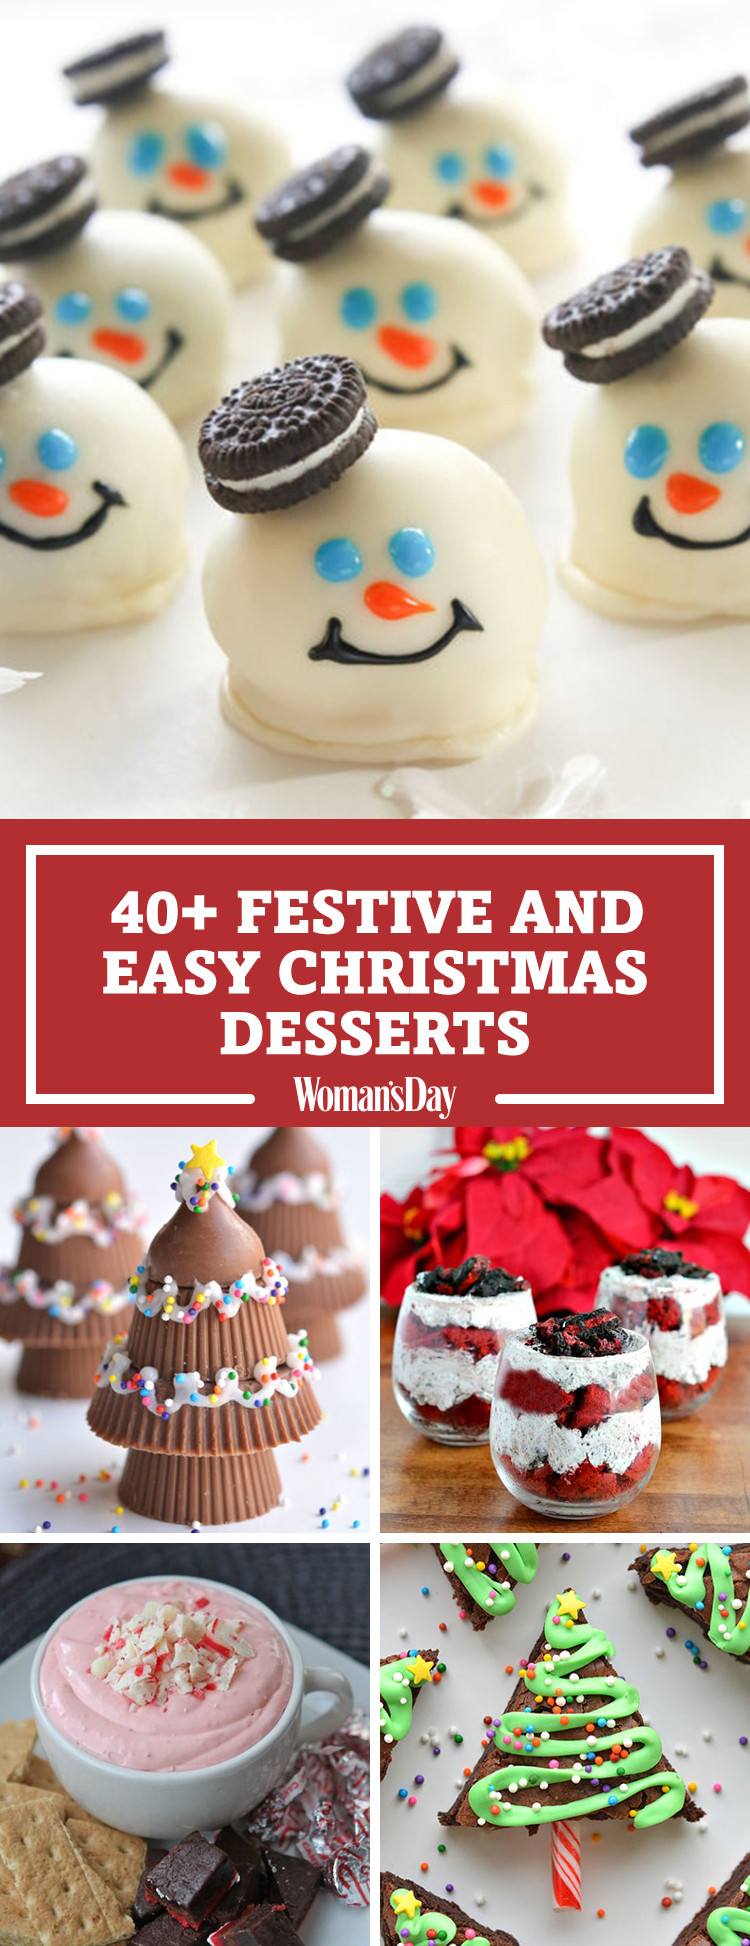 Holiday Desserts Ideas
 57 Easy Christmas Dessert Recipes Best Ideas for Fun